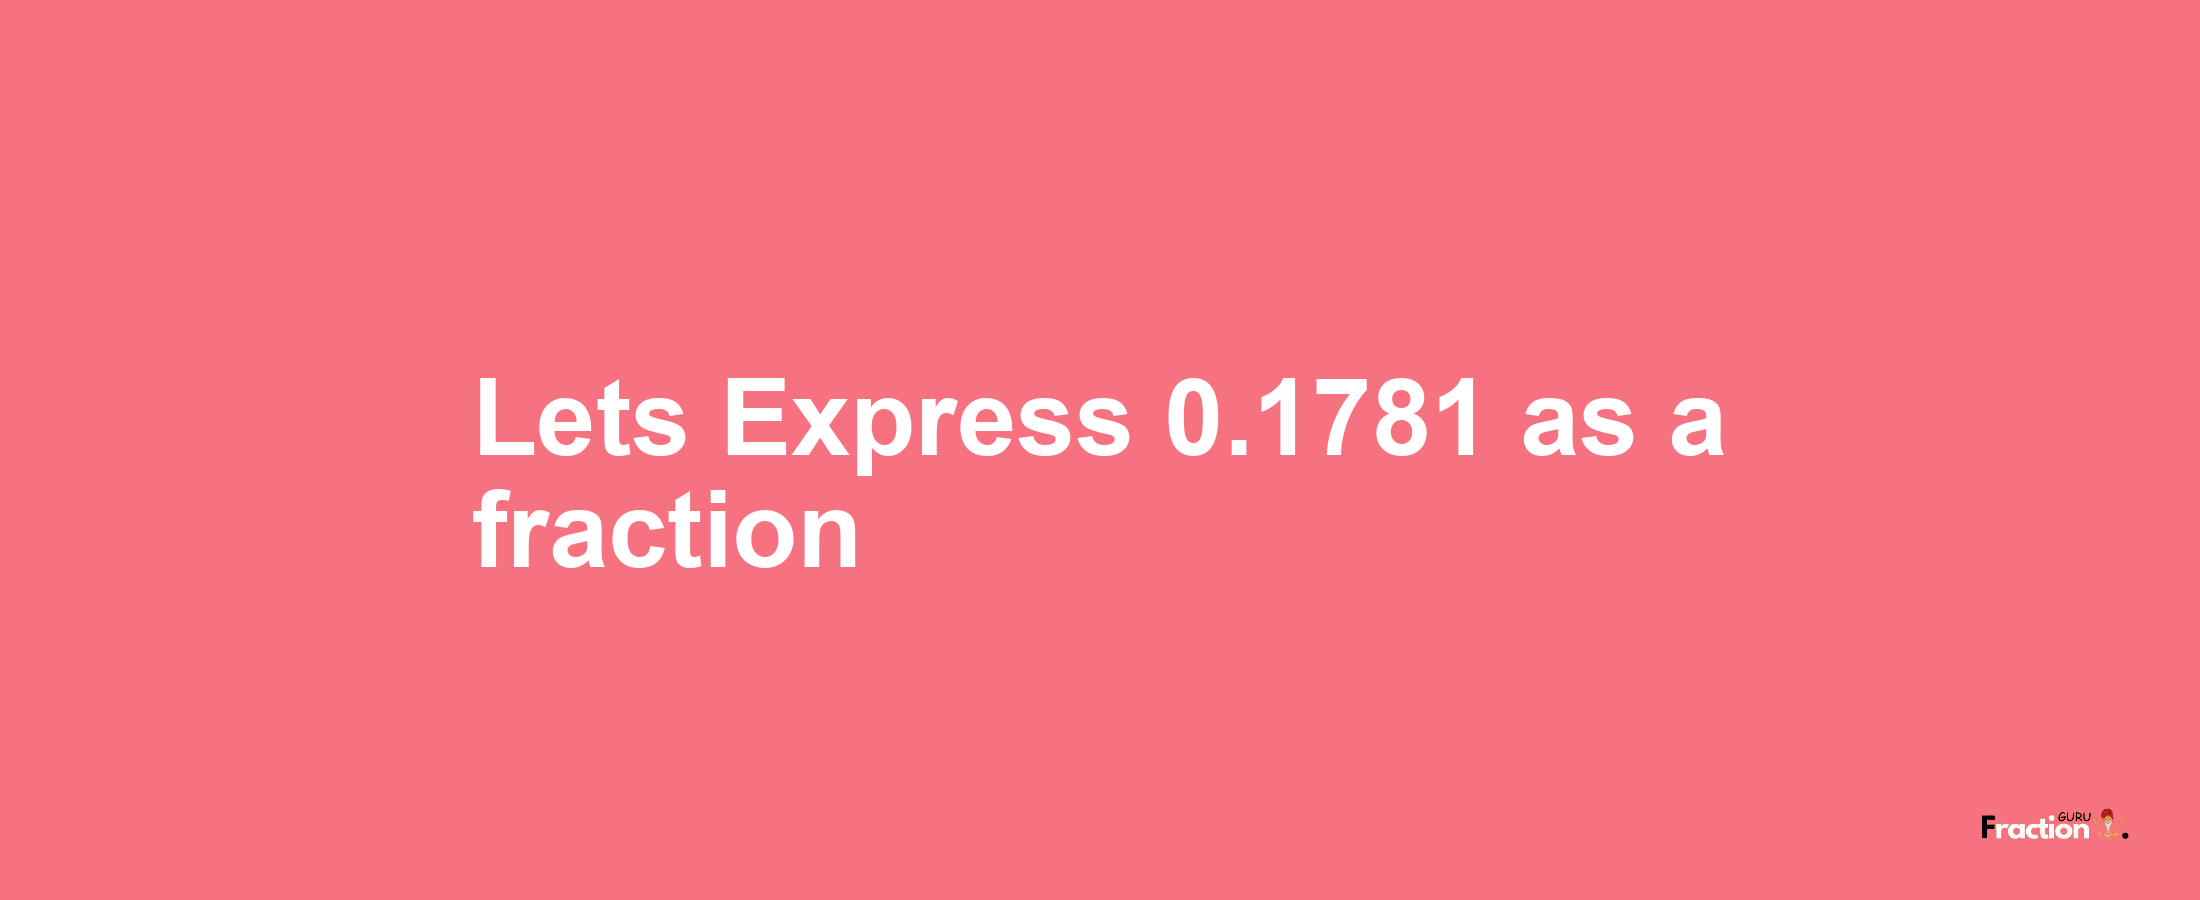 Lets Express 0.1781 as afraction